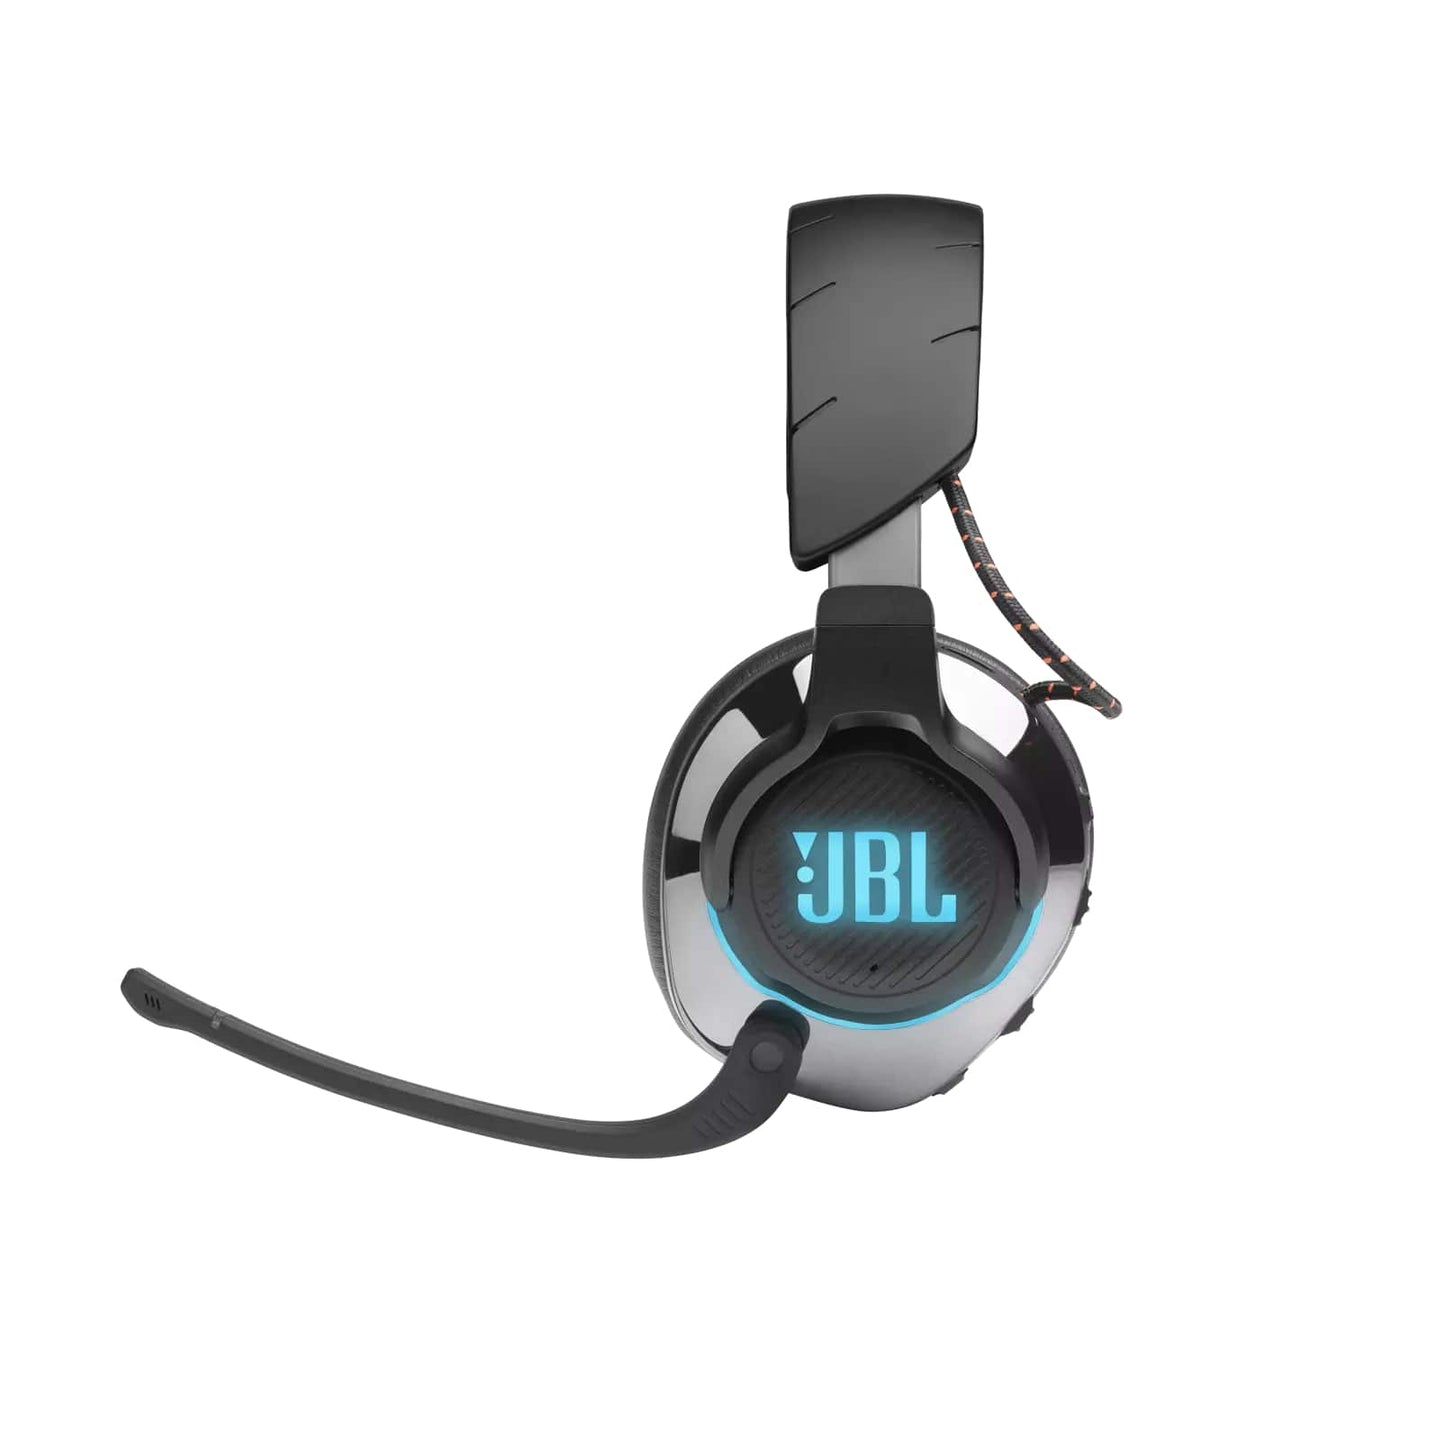 JBL Quantum 800 BTNC Wired / Wireless Bluetooth Gaming Headphones with Lossless 2.4GHz Connectivity, 14Hr Battery Life, ANC Active Noise Cancelling and Detachable 3.5mm AUX Cable for PC Laptop and Consoles (Black)